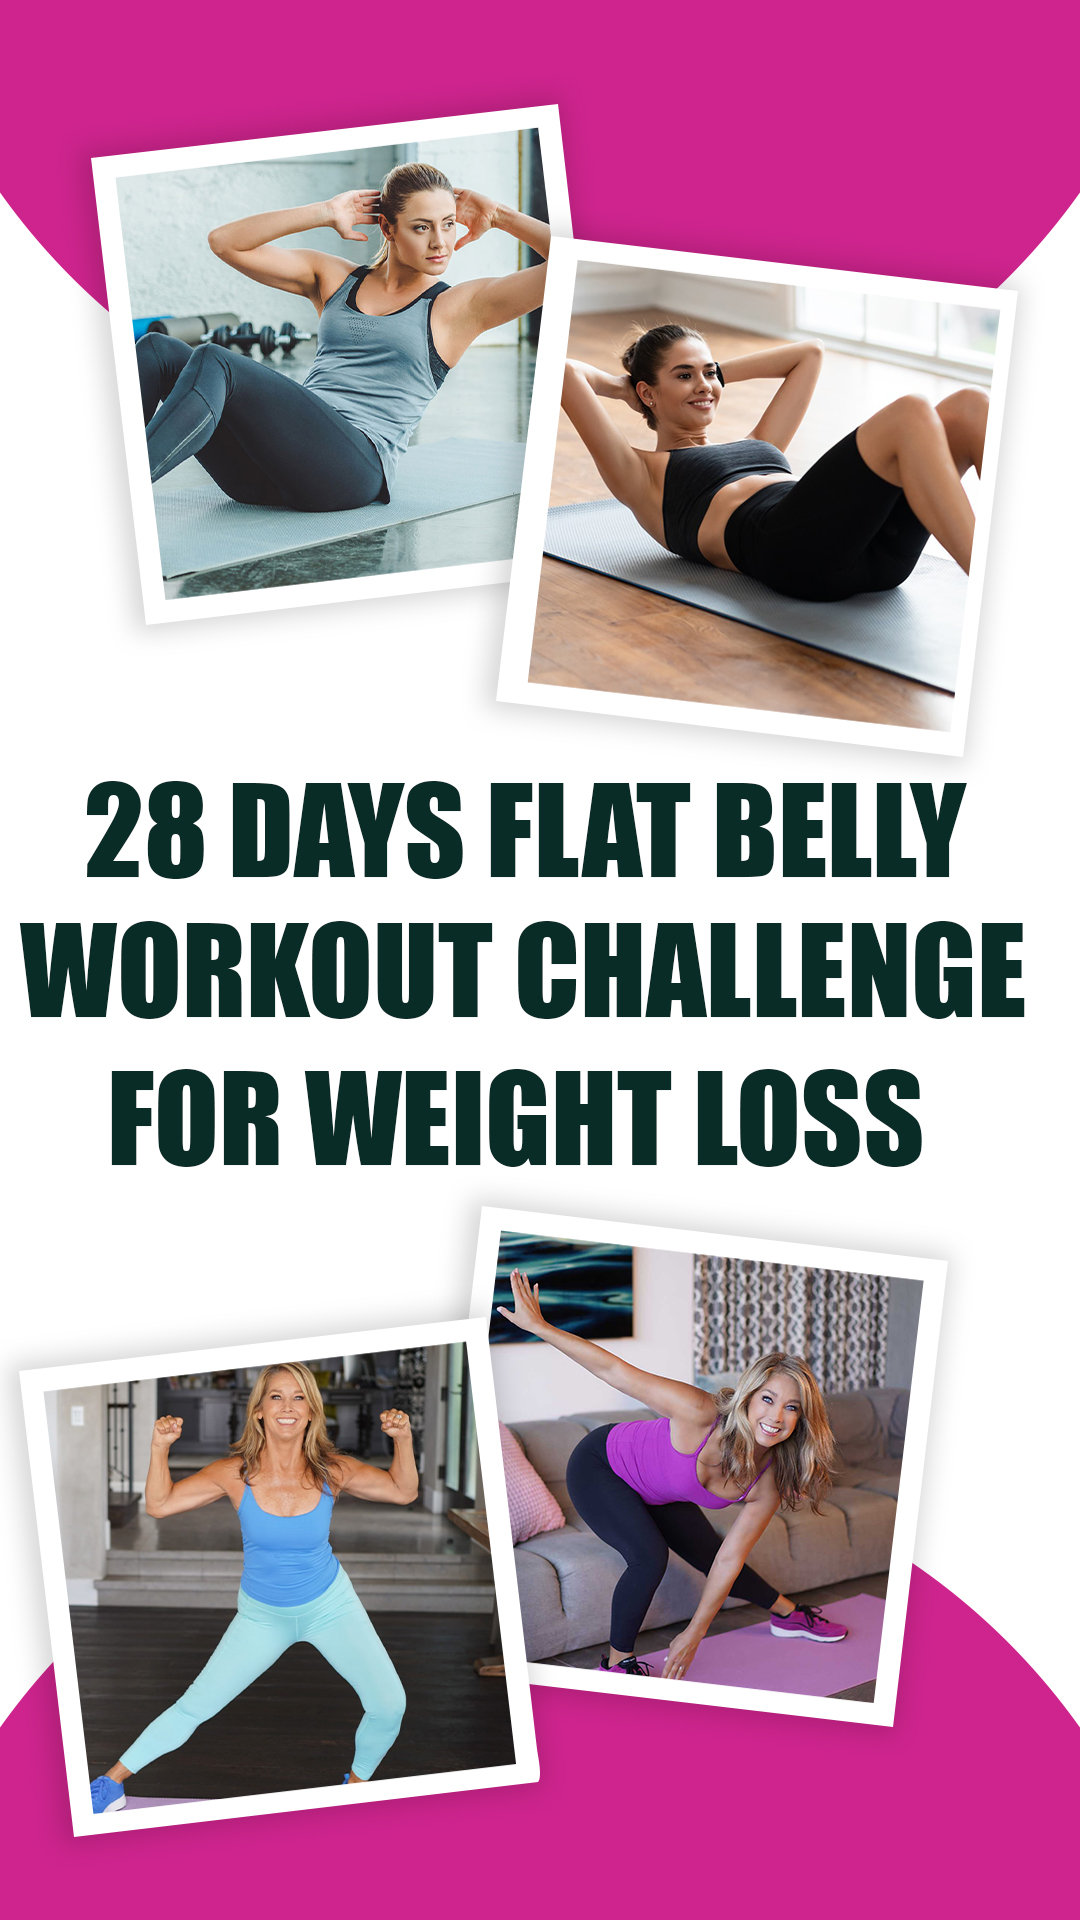 28-Day Flat Belly Workout Challenge Trim Belly Fat 